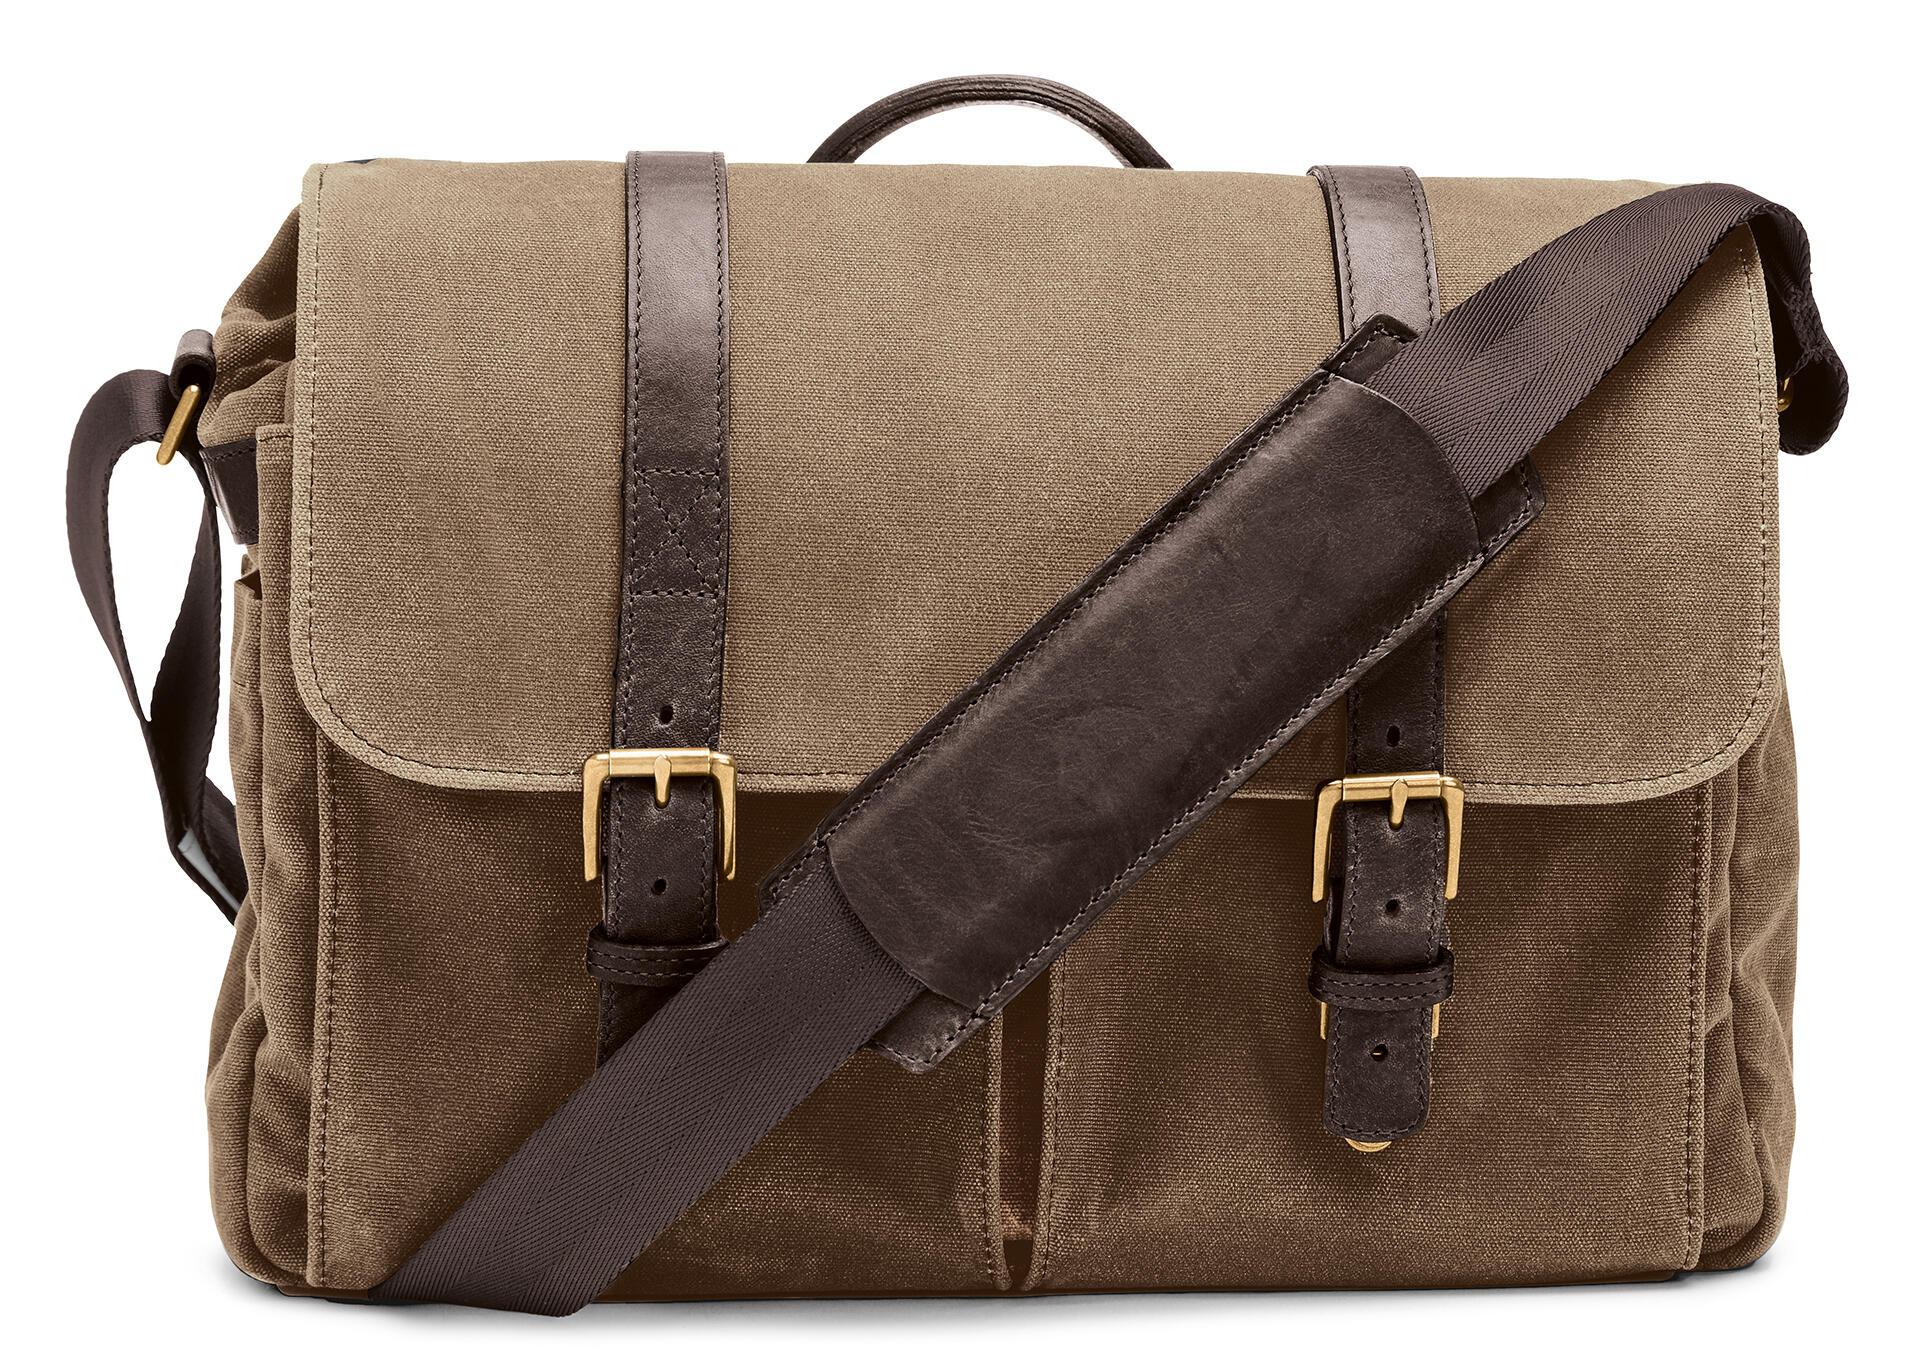 The Brixton | Bags, Leather, Camera bag